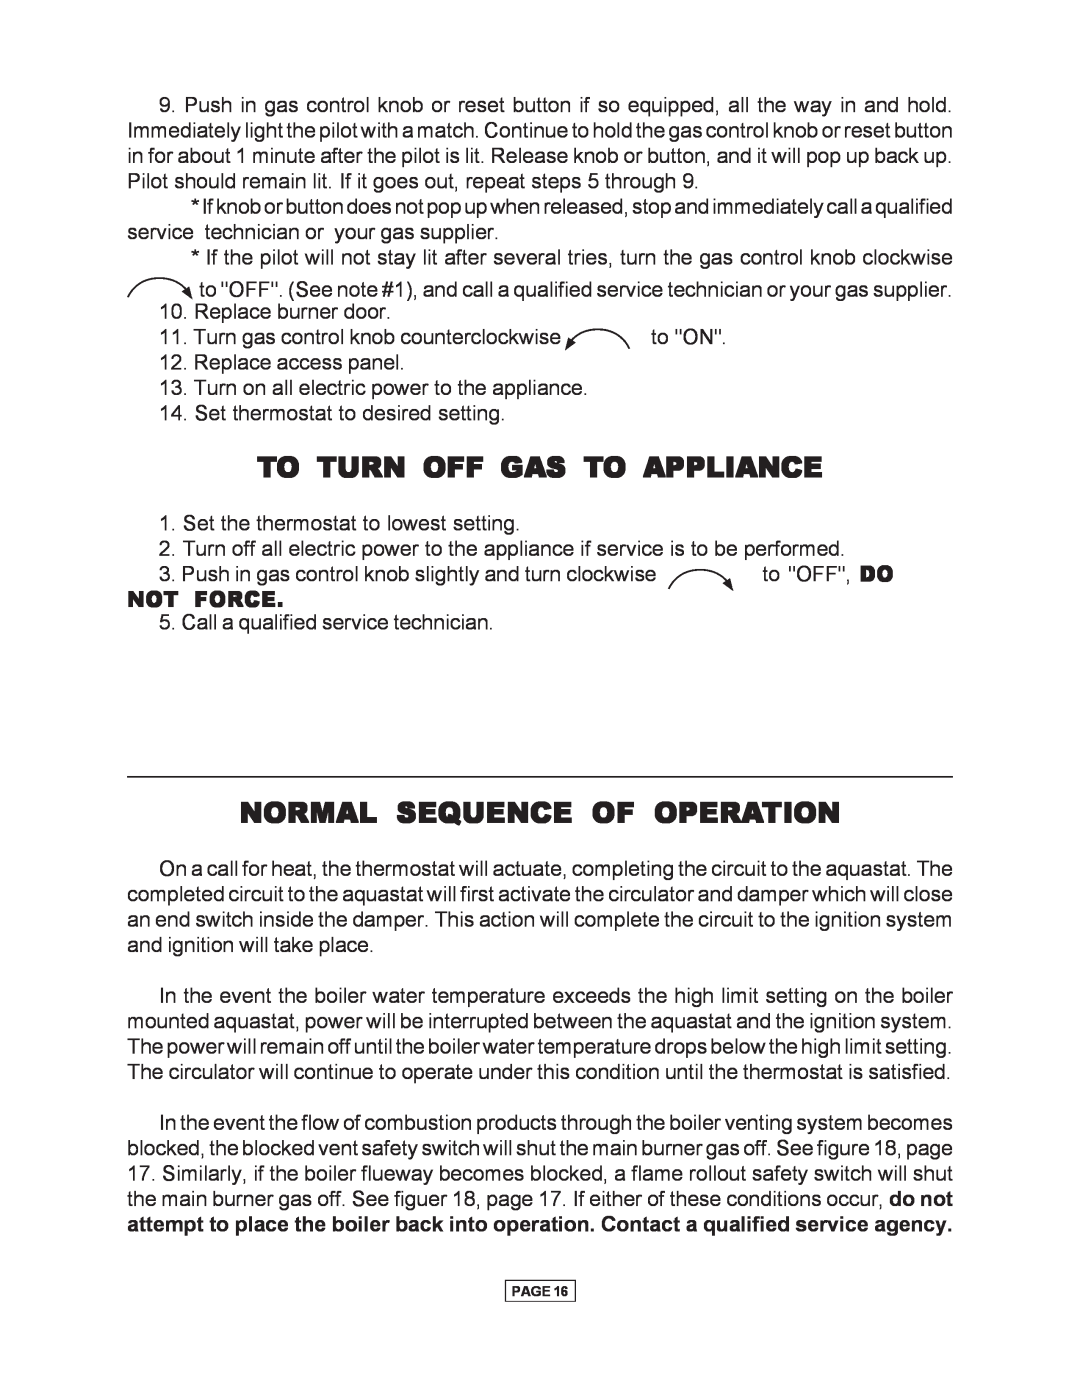 Utica Gas-fired Boiler manual To Turn Off Gas To Appliance, Normal Sequence Of Operation, Not Force 